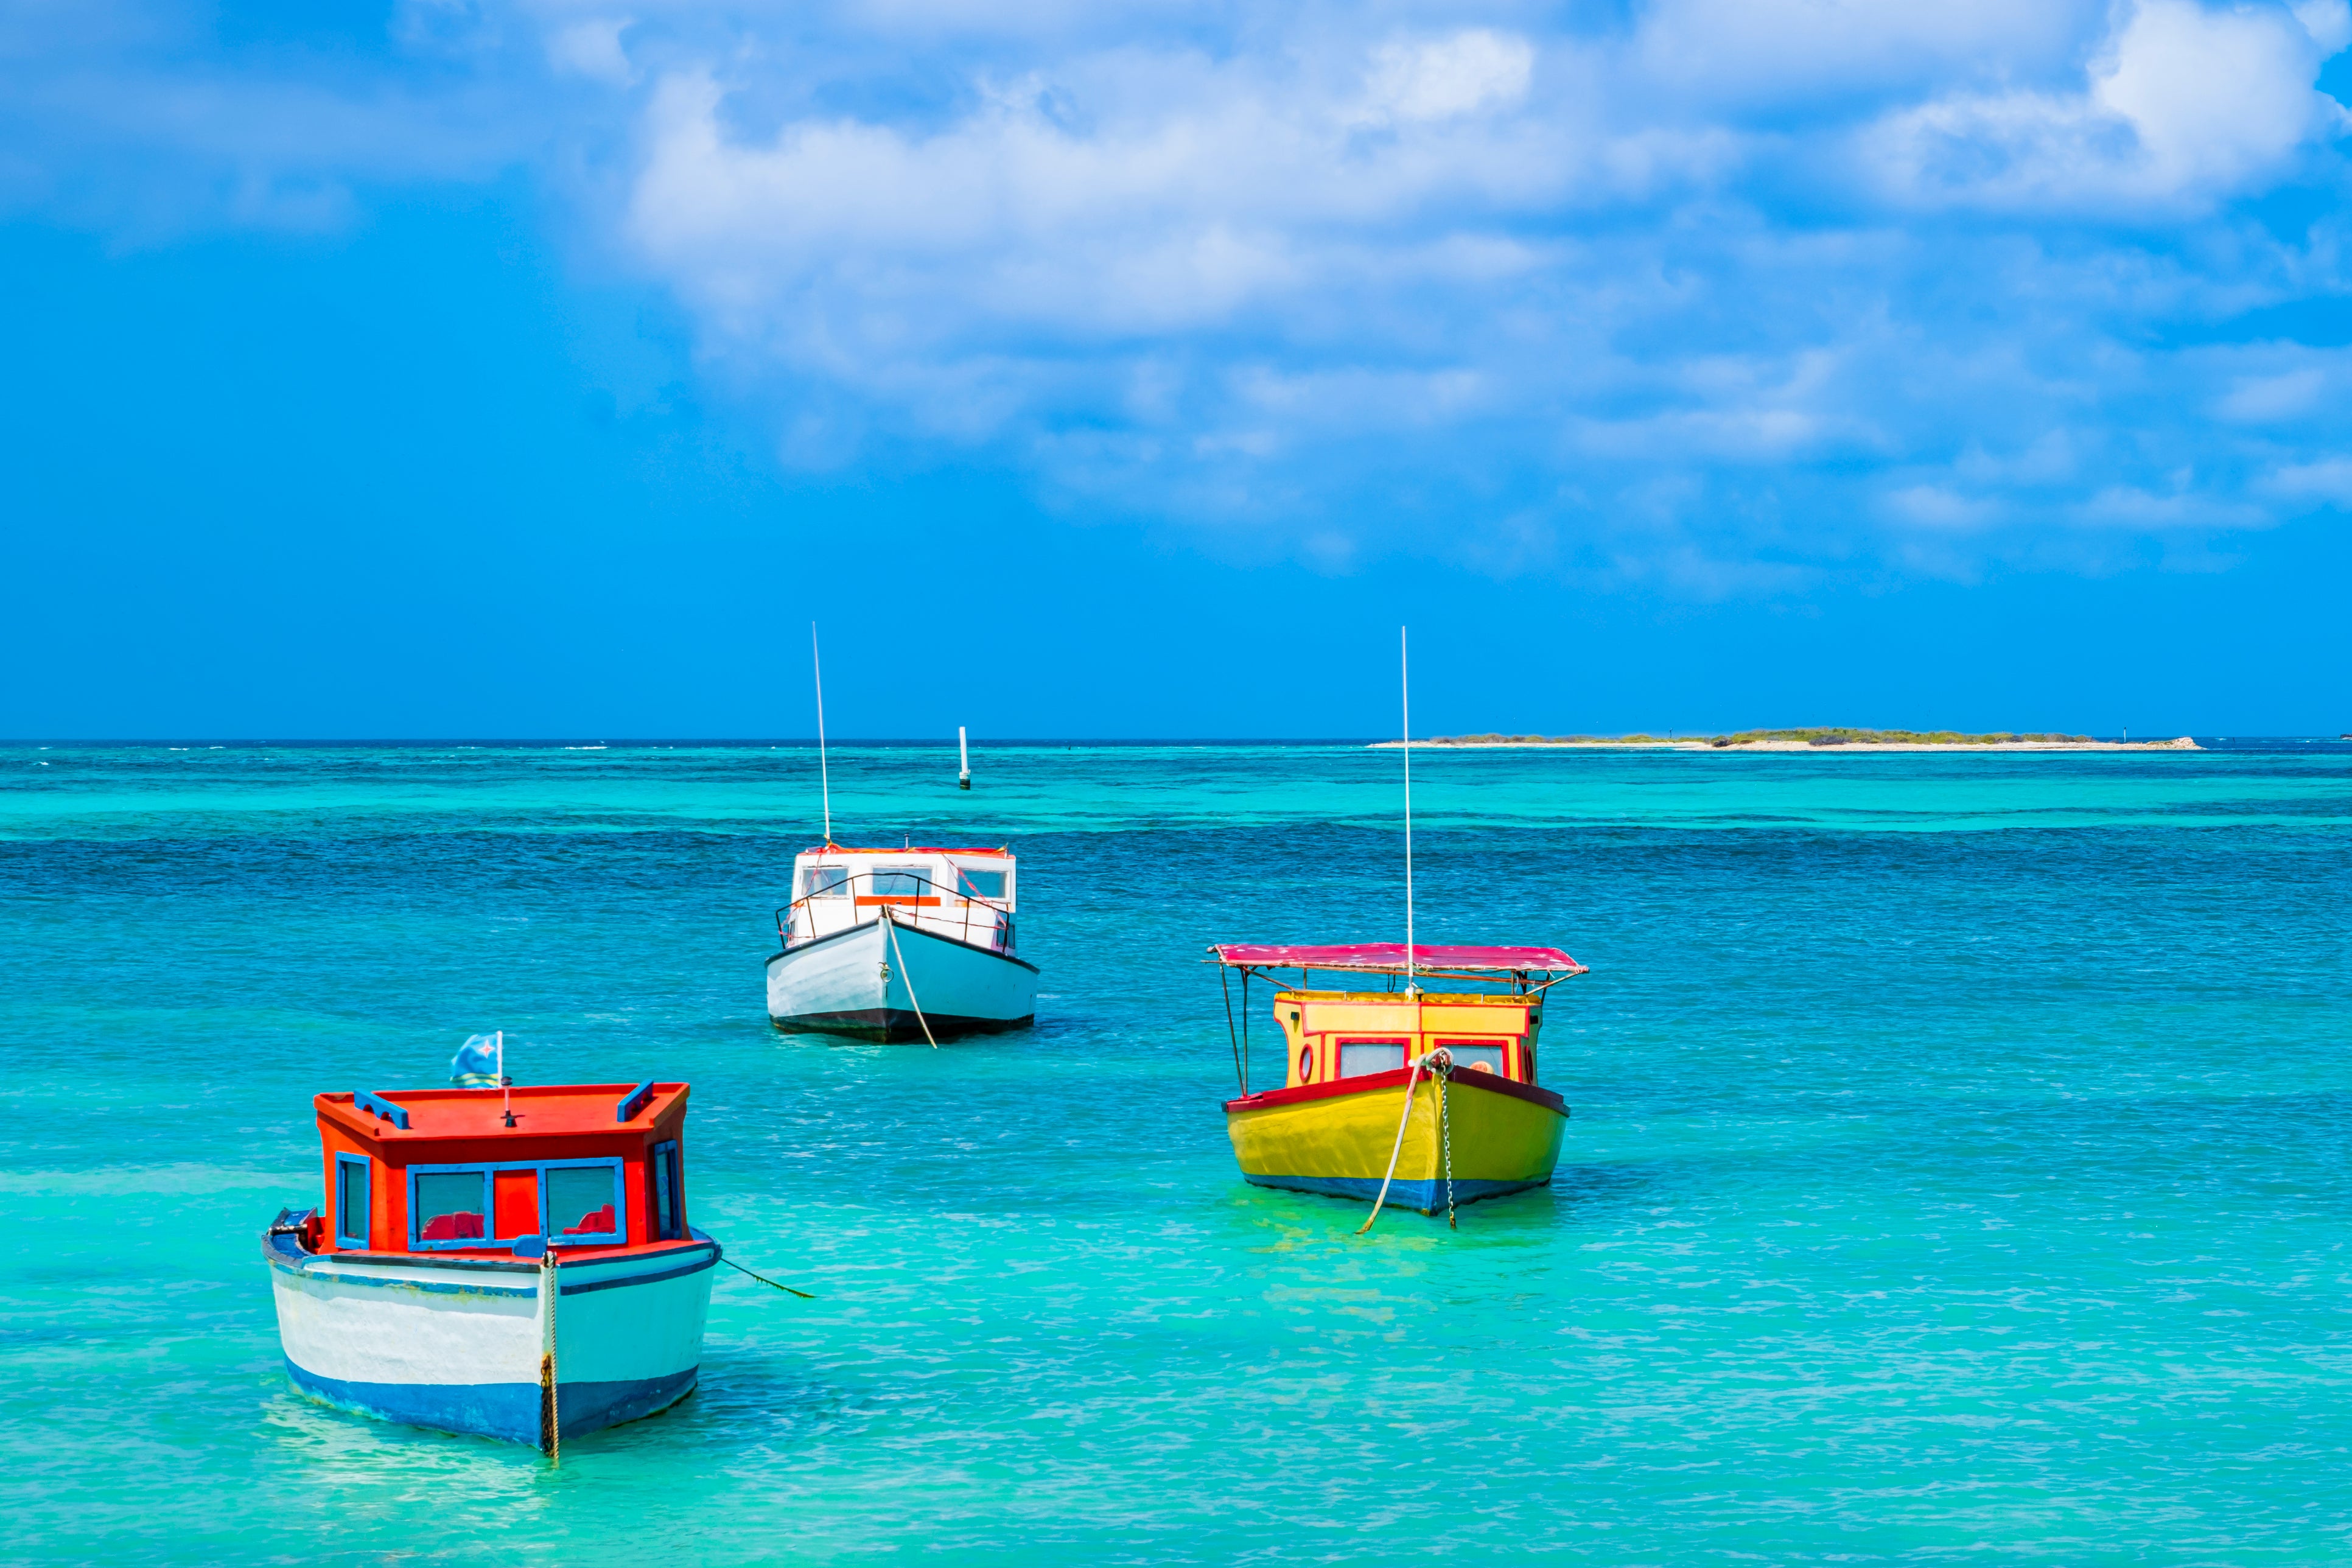 With around 300 days of annual sunshine, Aruba is one of the Caribbean’s sunniest hotspots